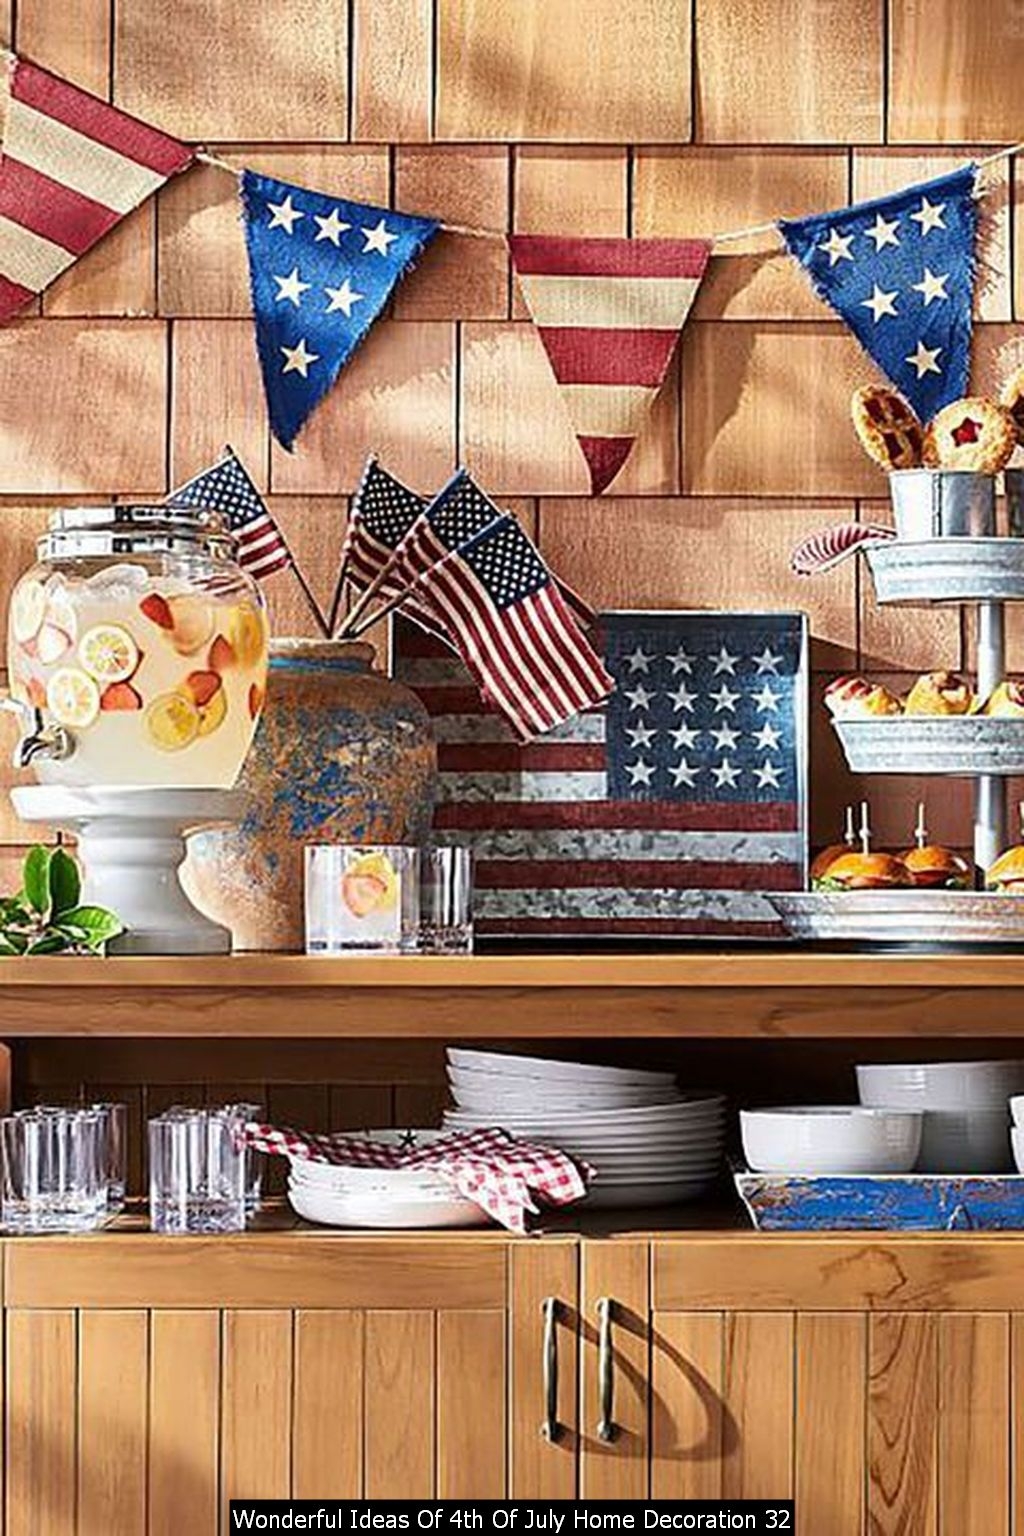 Wonderful Ideas Of 4th Of July Home Decoration 32